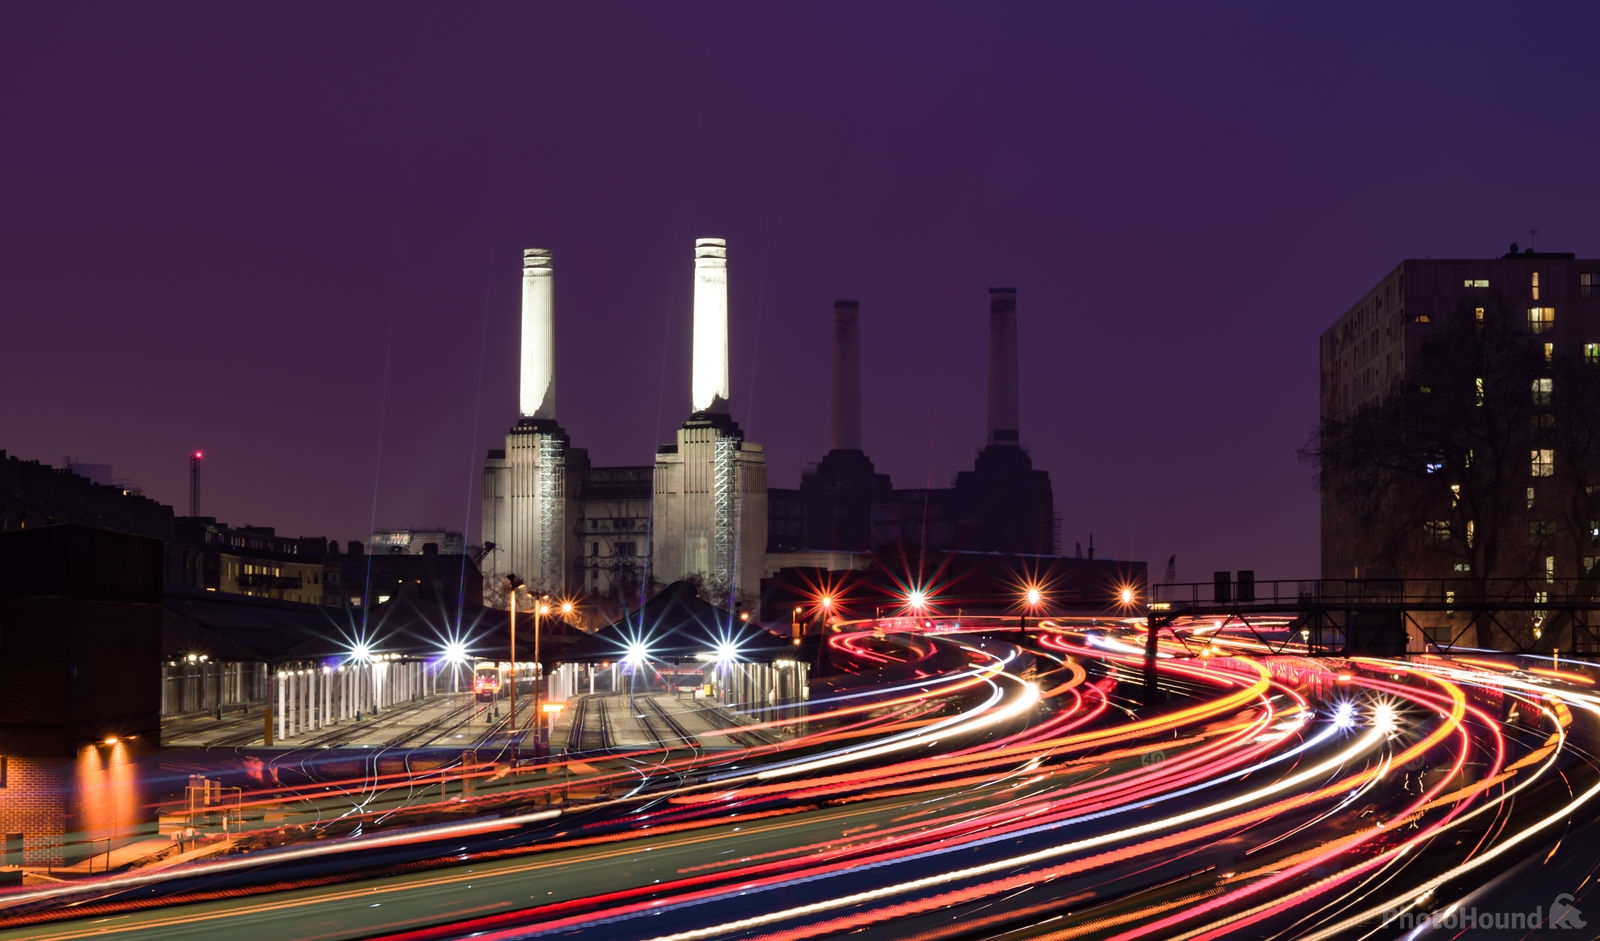 Image of View of Battersea Power Station by Anthony Harbison